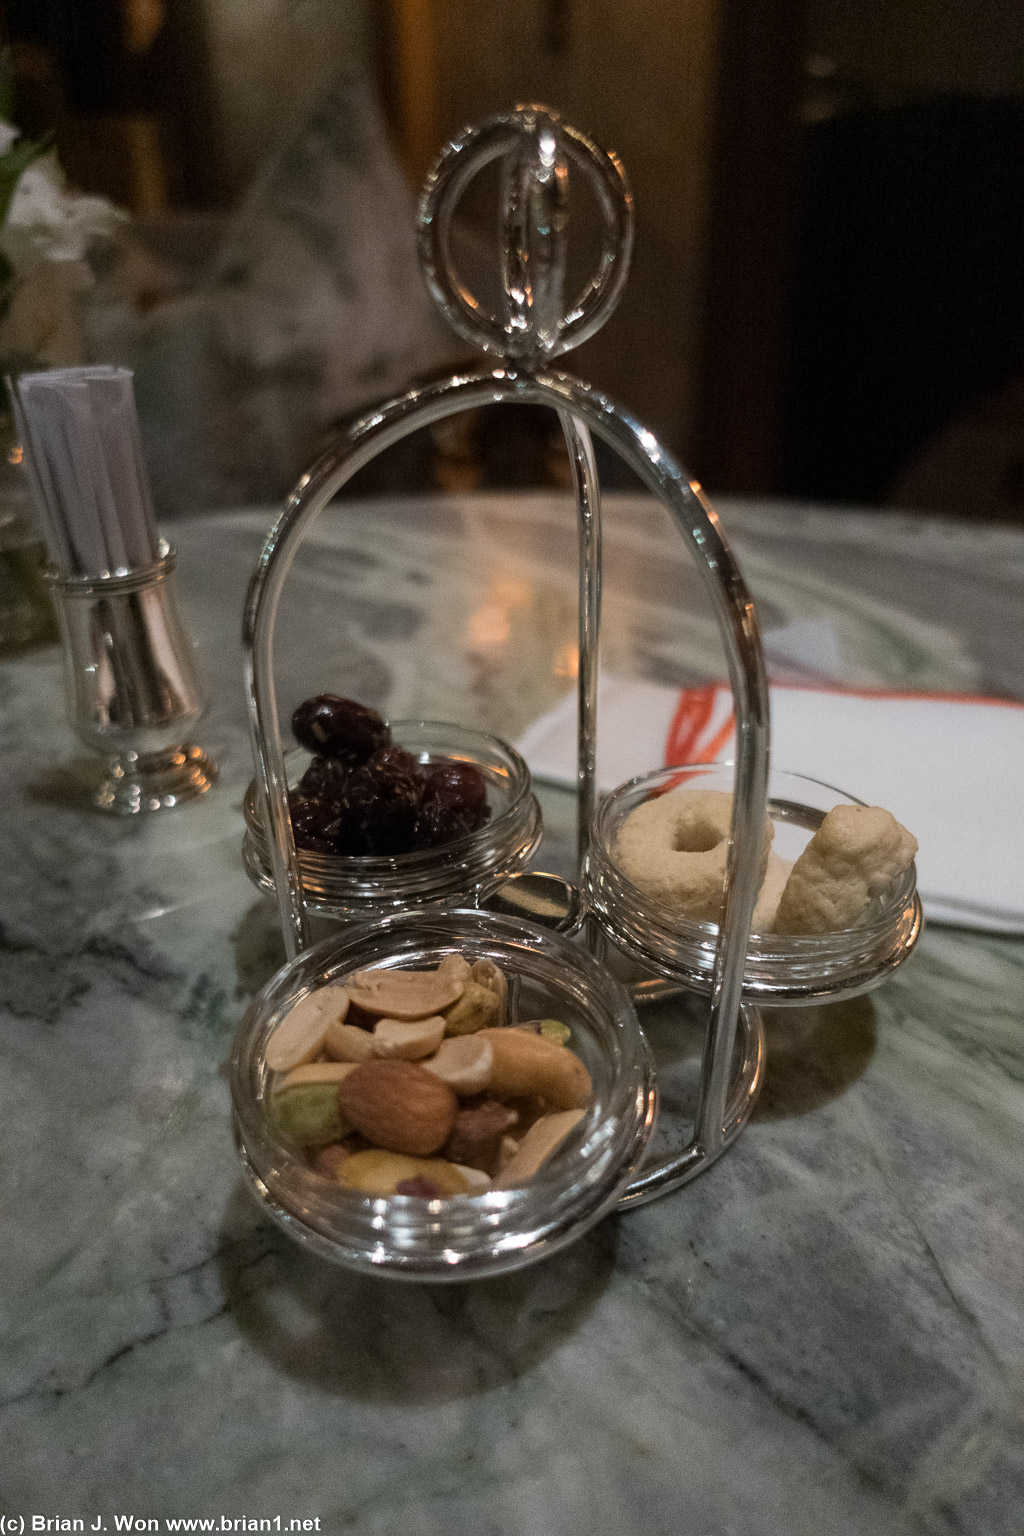 Bar snacks. Nuts, olives, crackers.